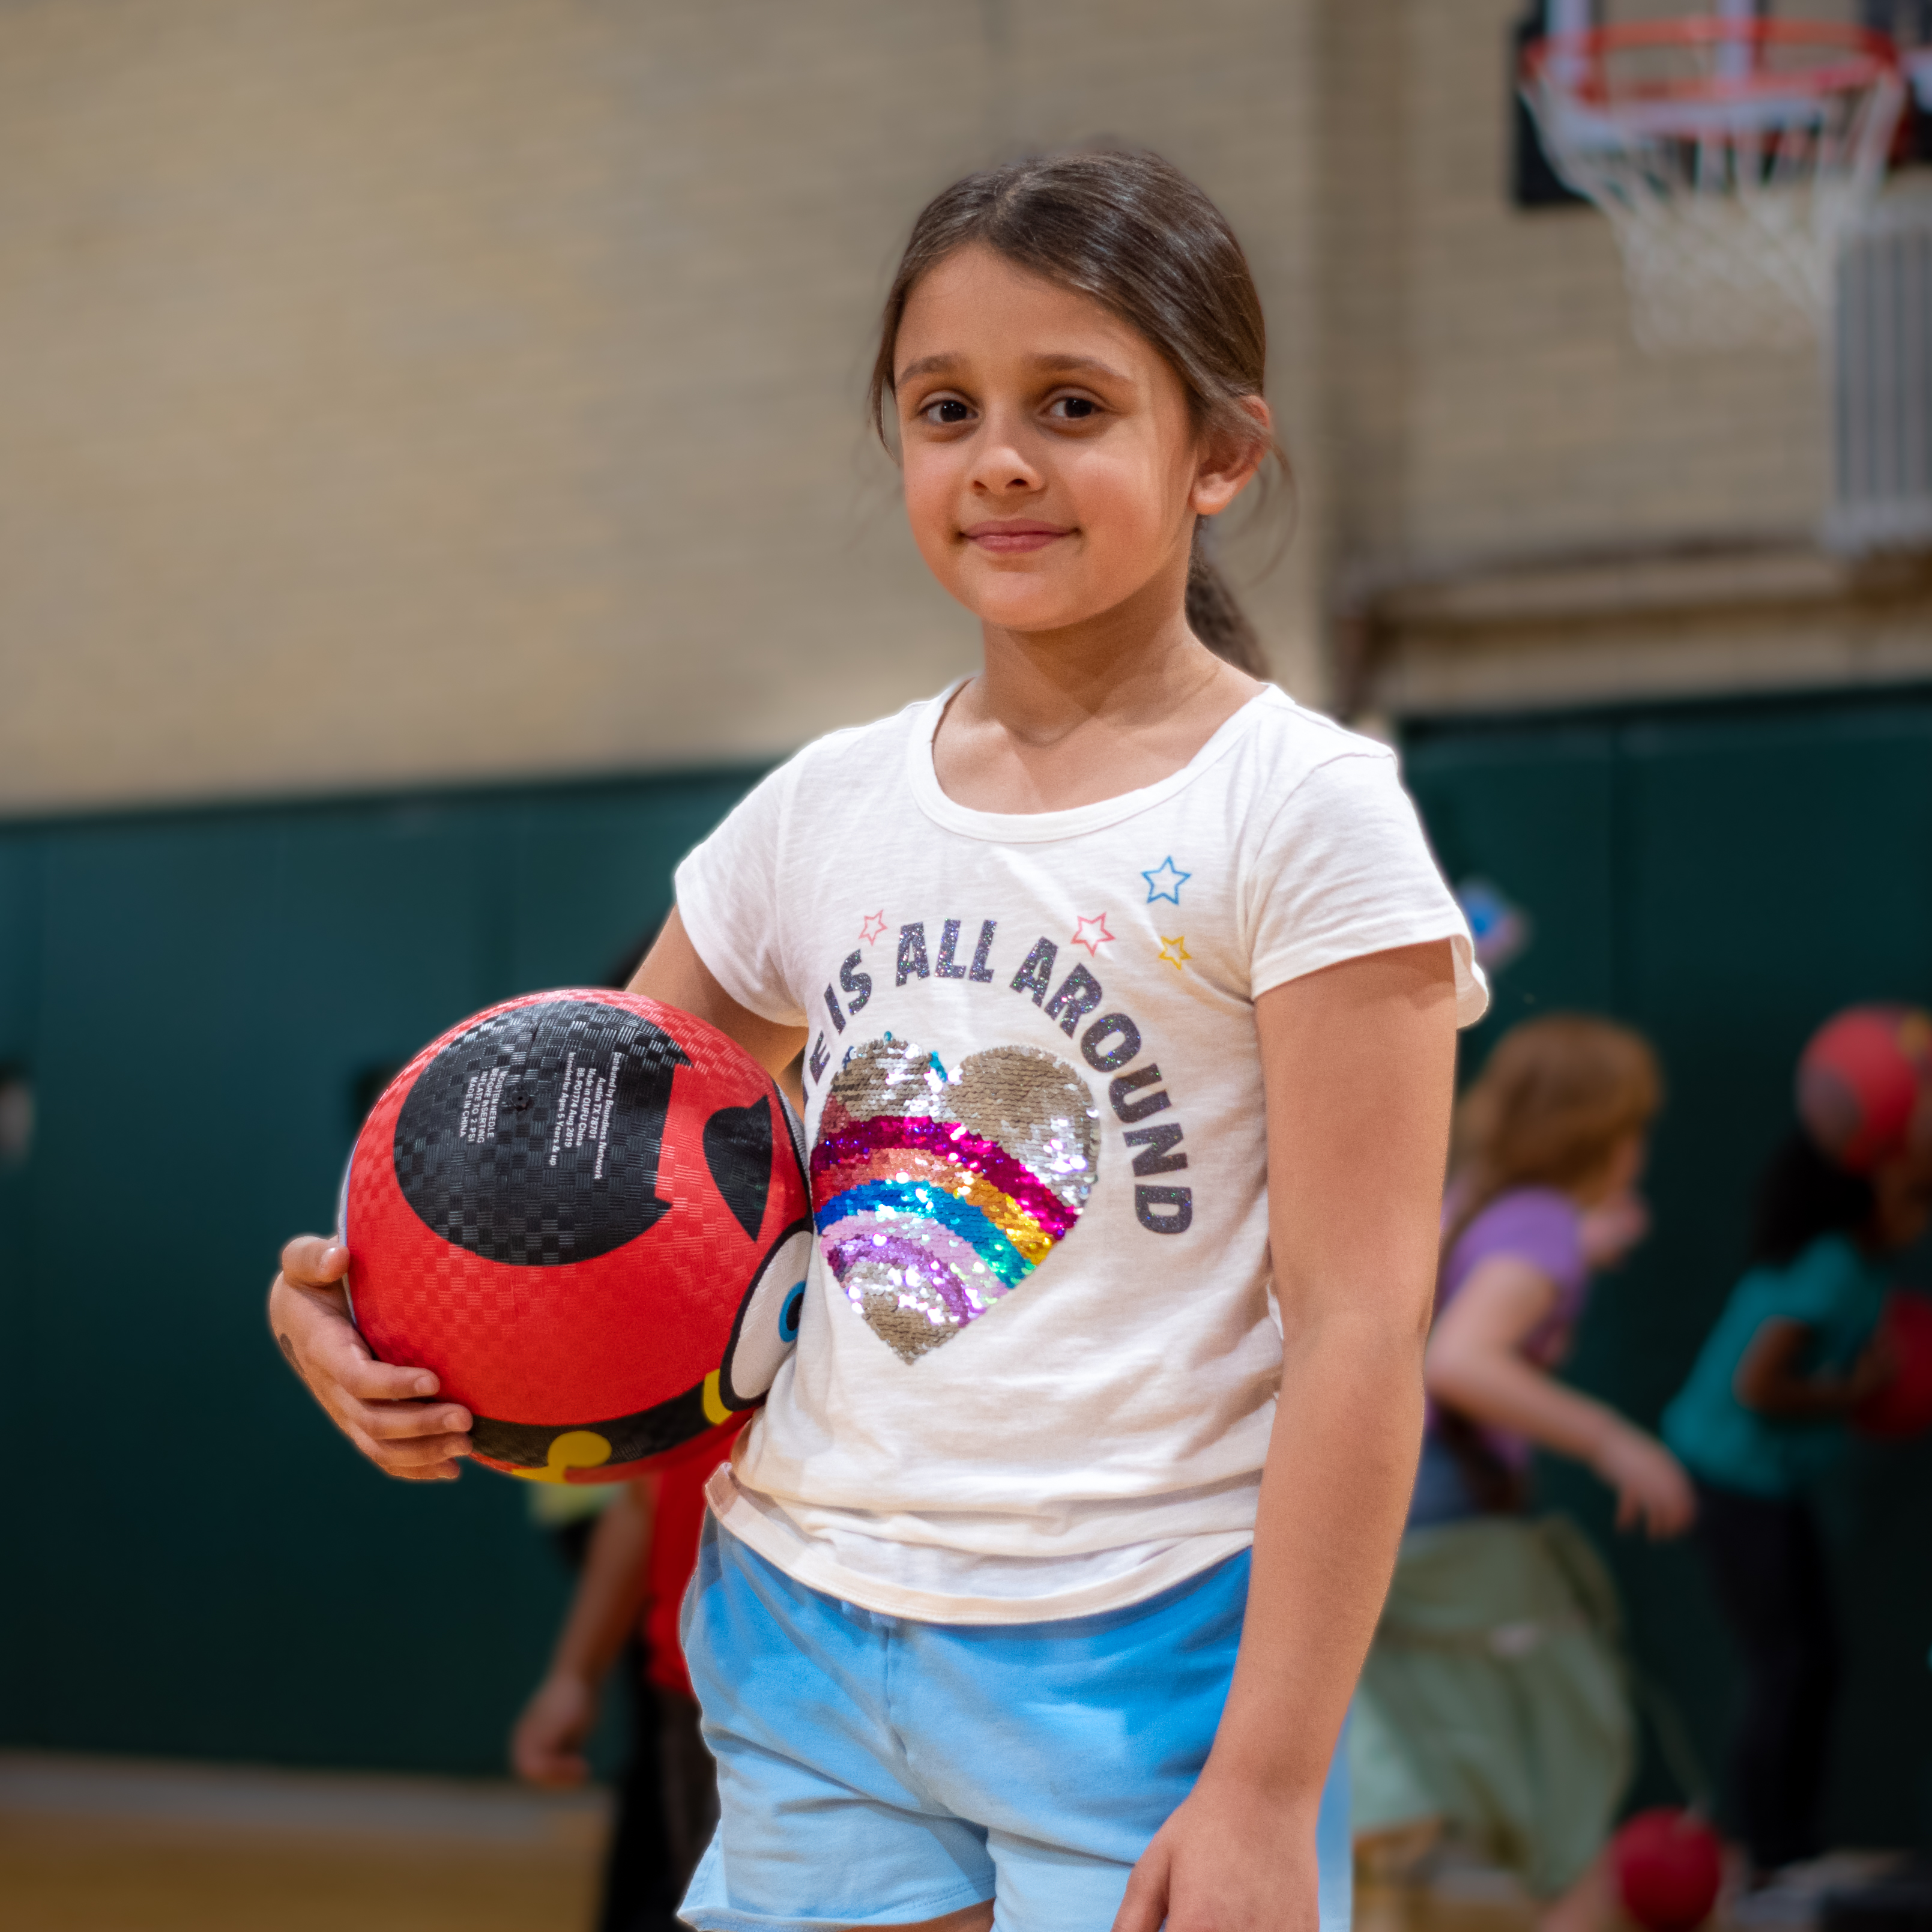 Student in gym class smiling as she holding a sports ball as other students in the background play. 